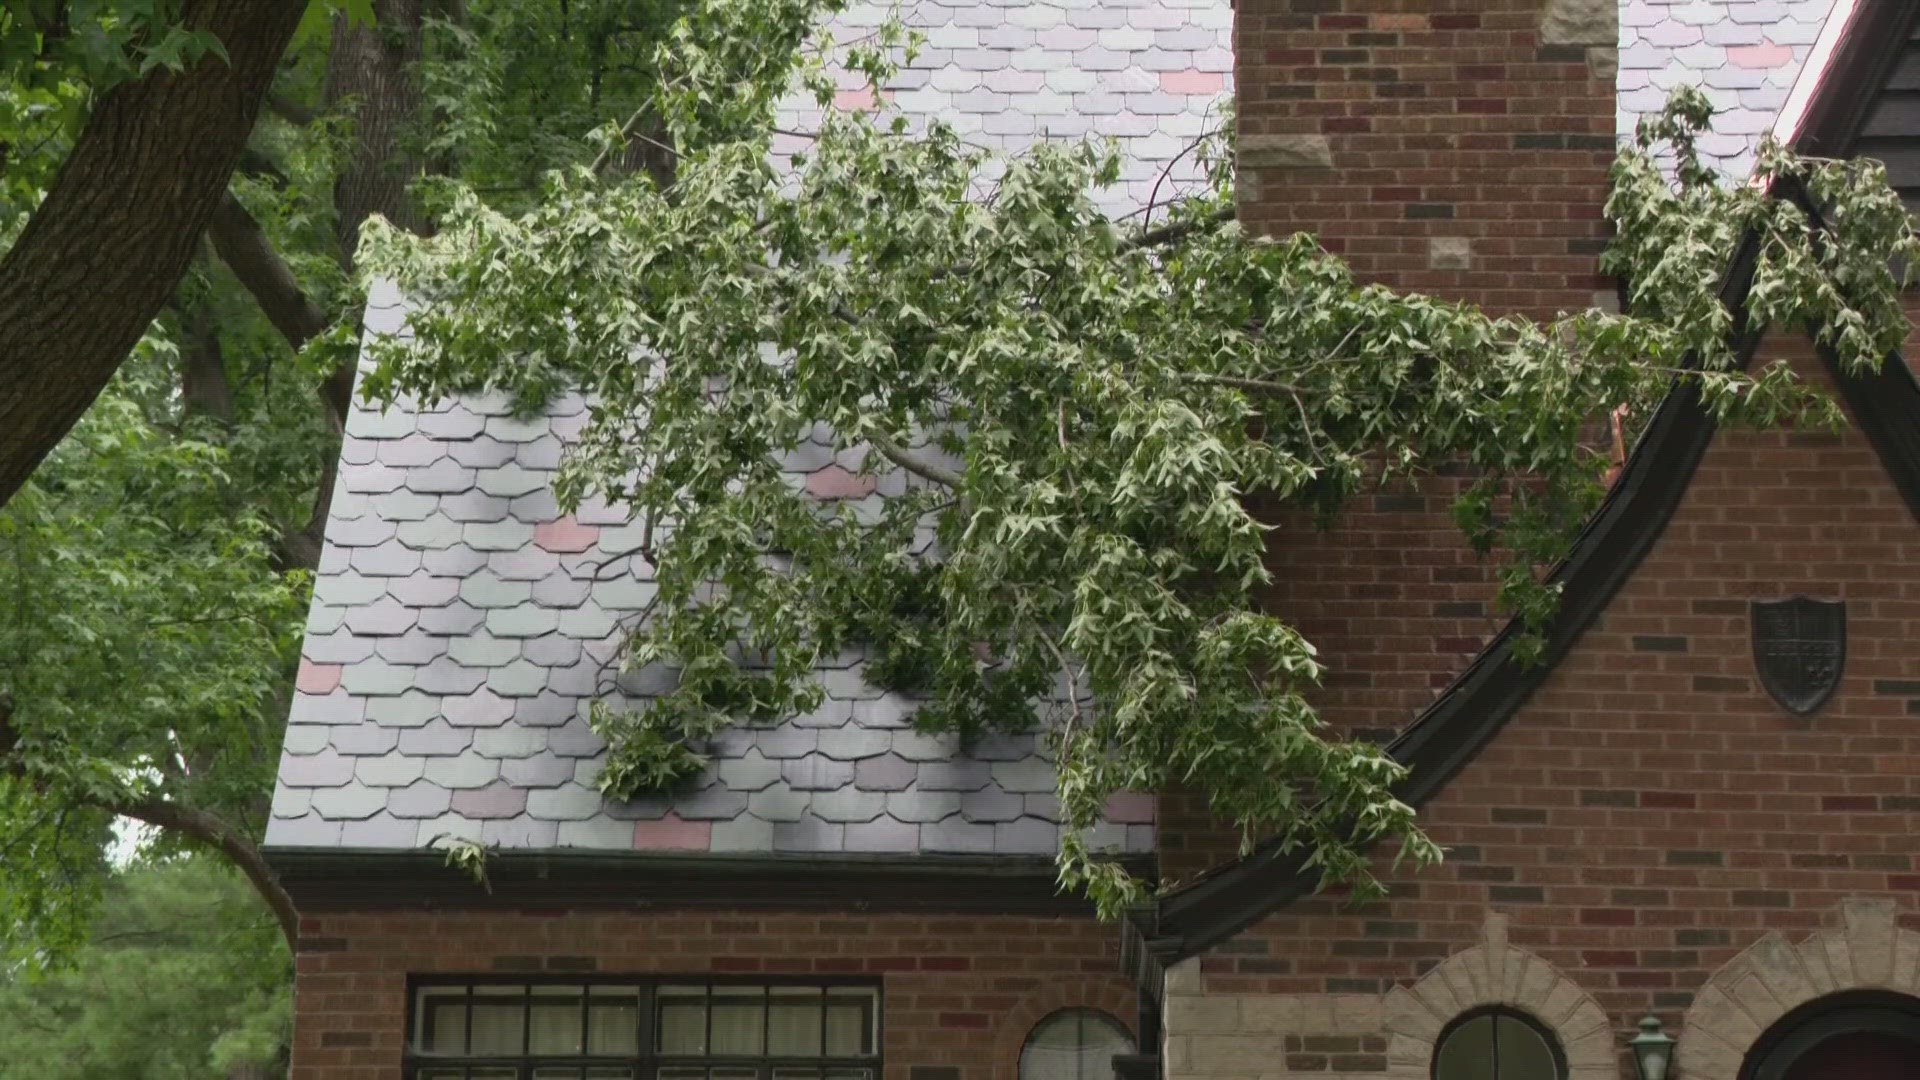 Ameren Illinois said the Metro East was one of the hardest hit areas after weekend storms. Around 400 homes were left to restore power as of Monday afternoon.